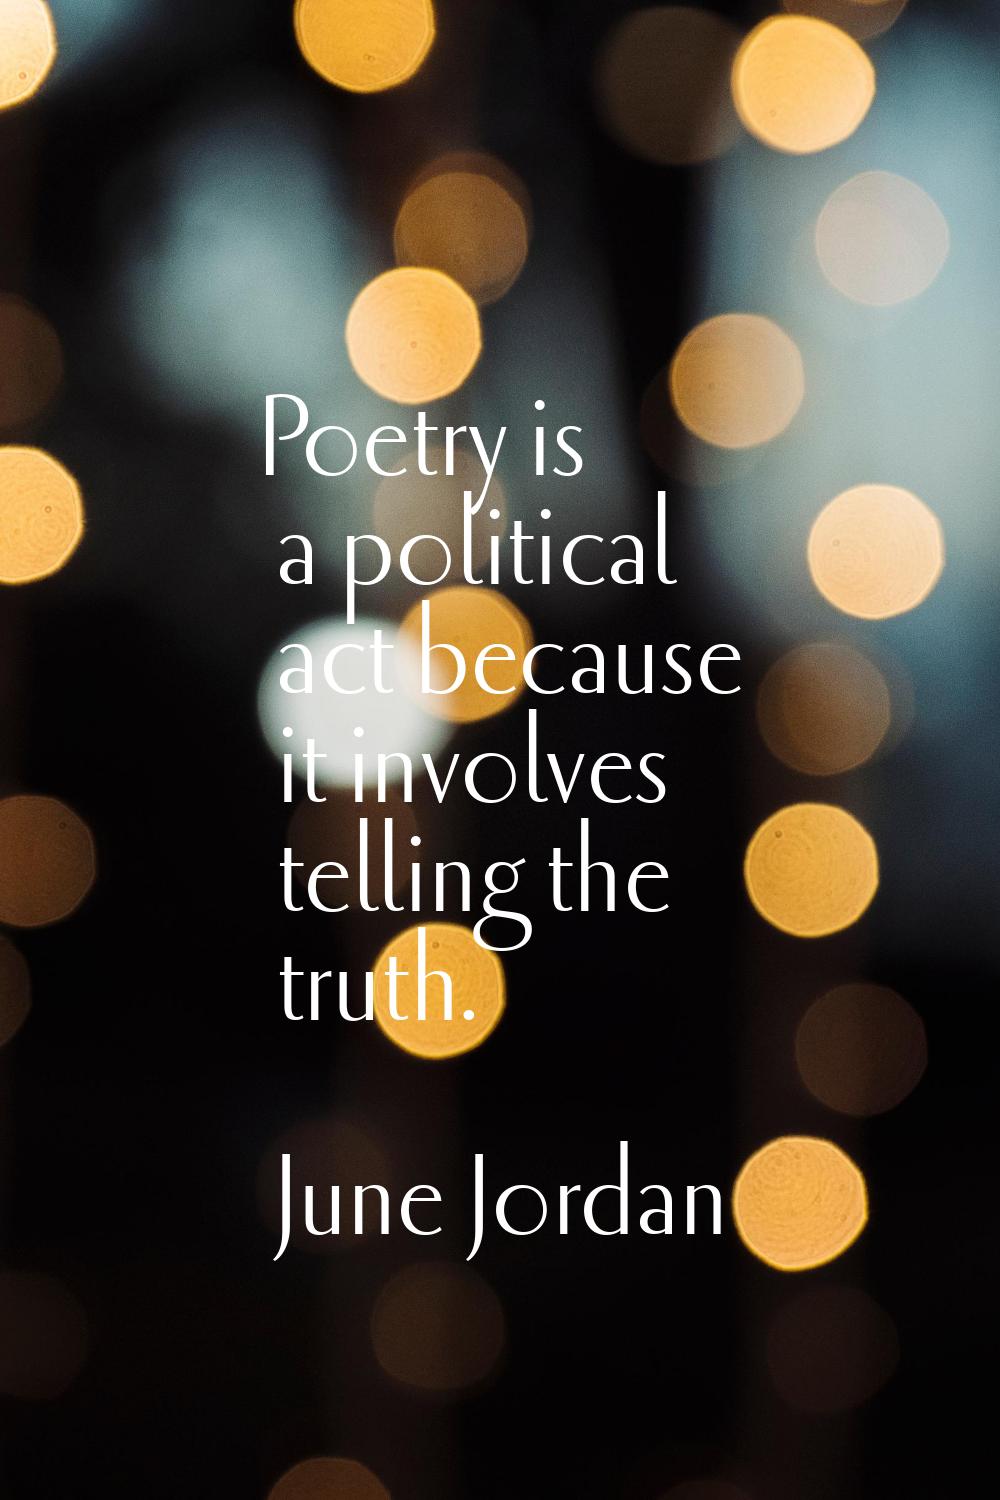 Poetry is a political act because it involves telling the truth.